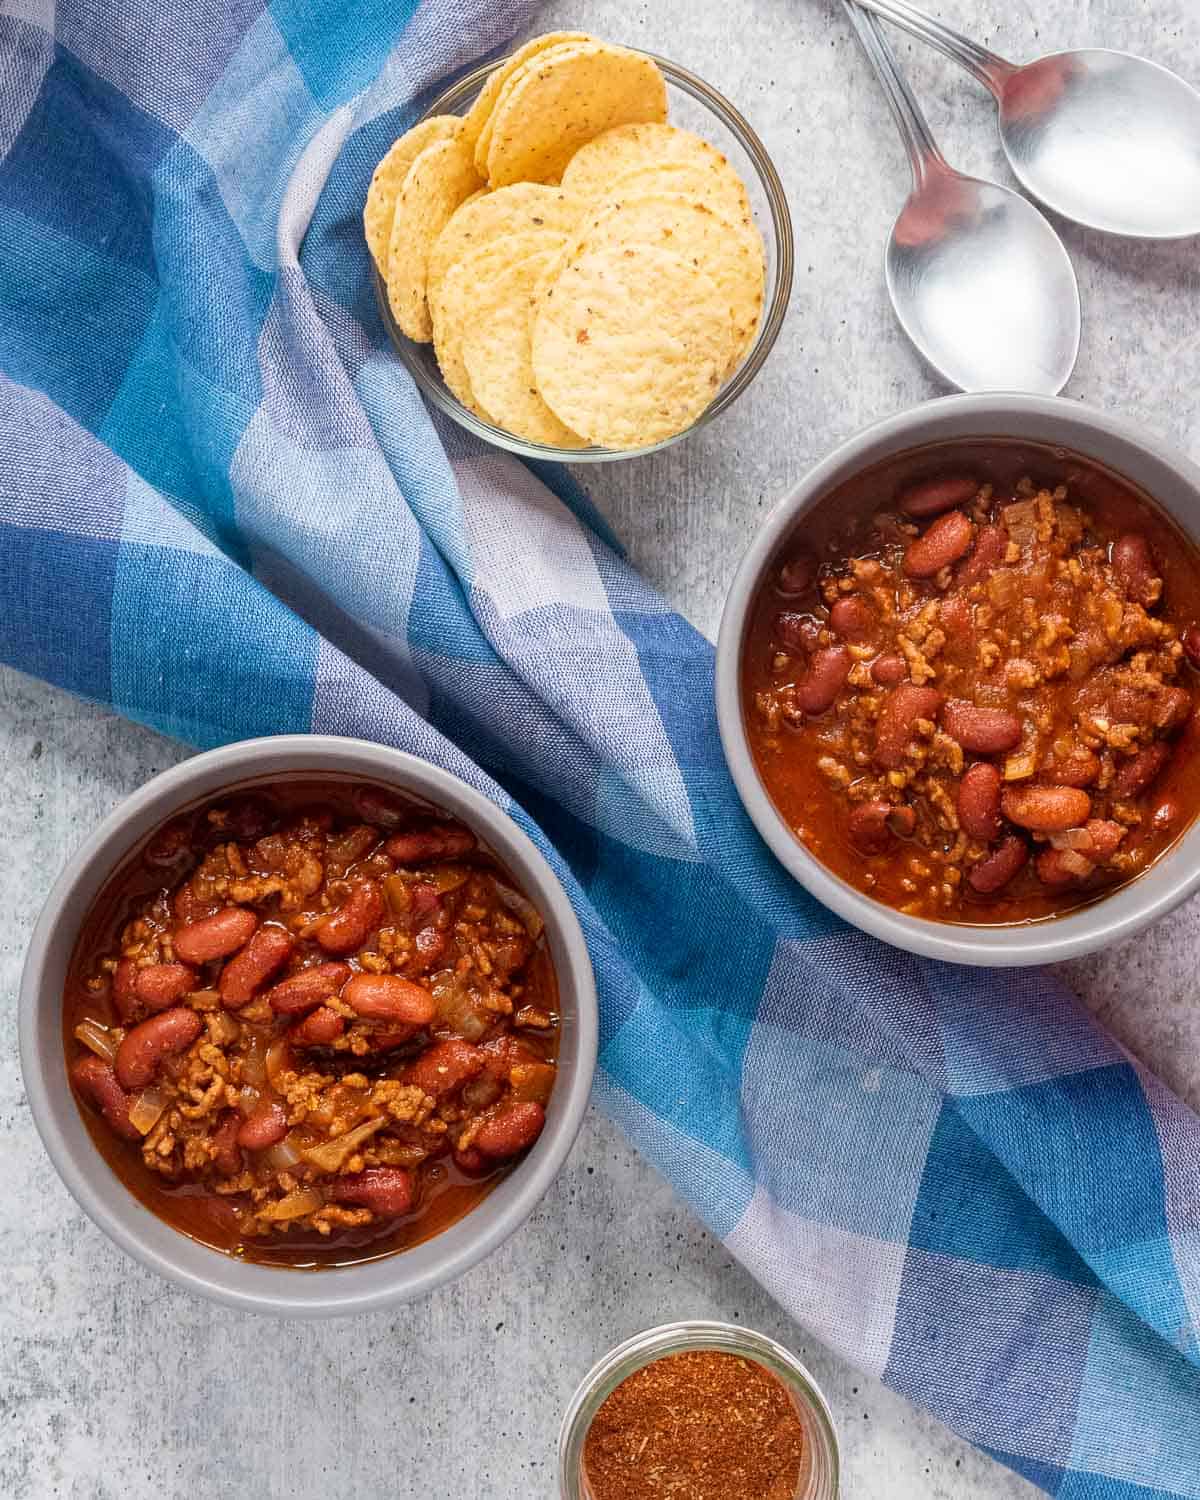 Two bowls of Dutch oven chili and a bowl with nacho chips.